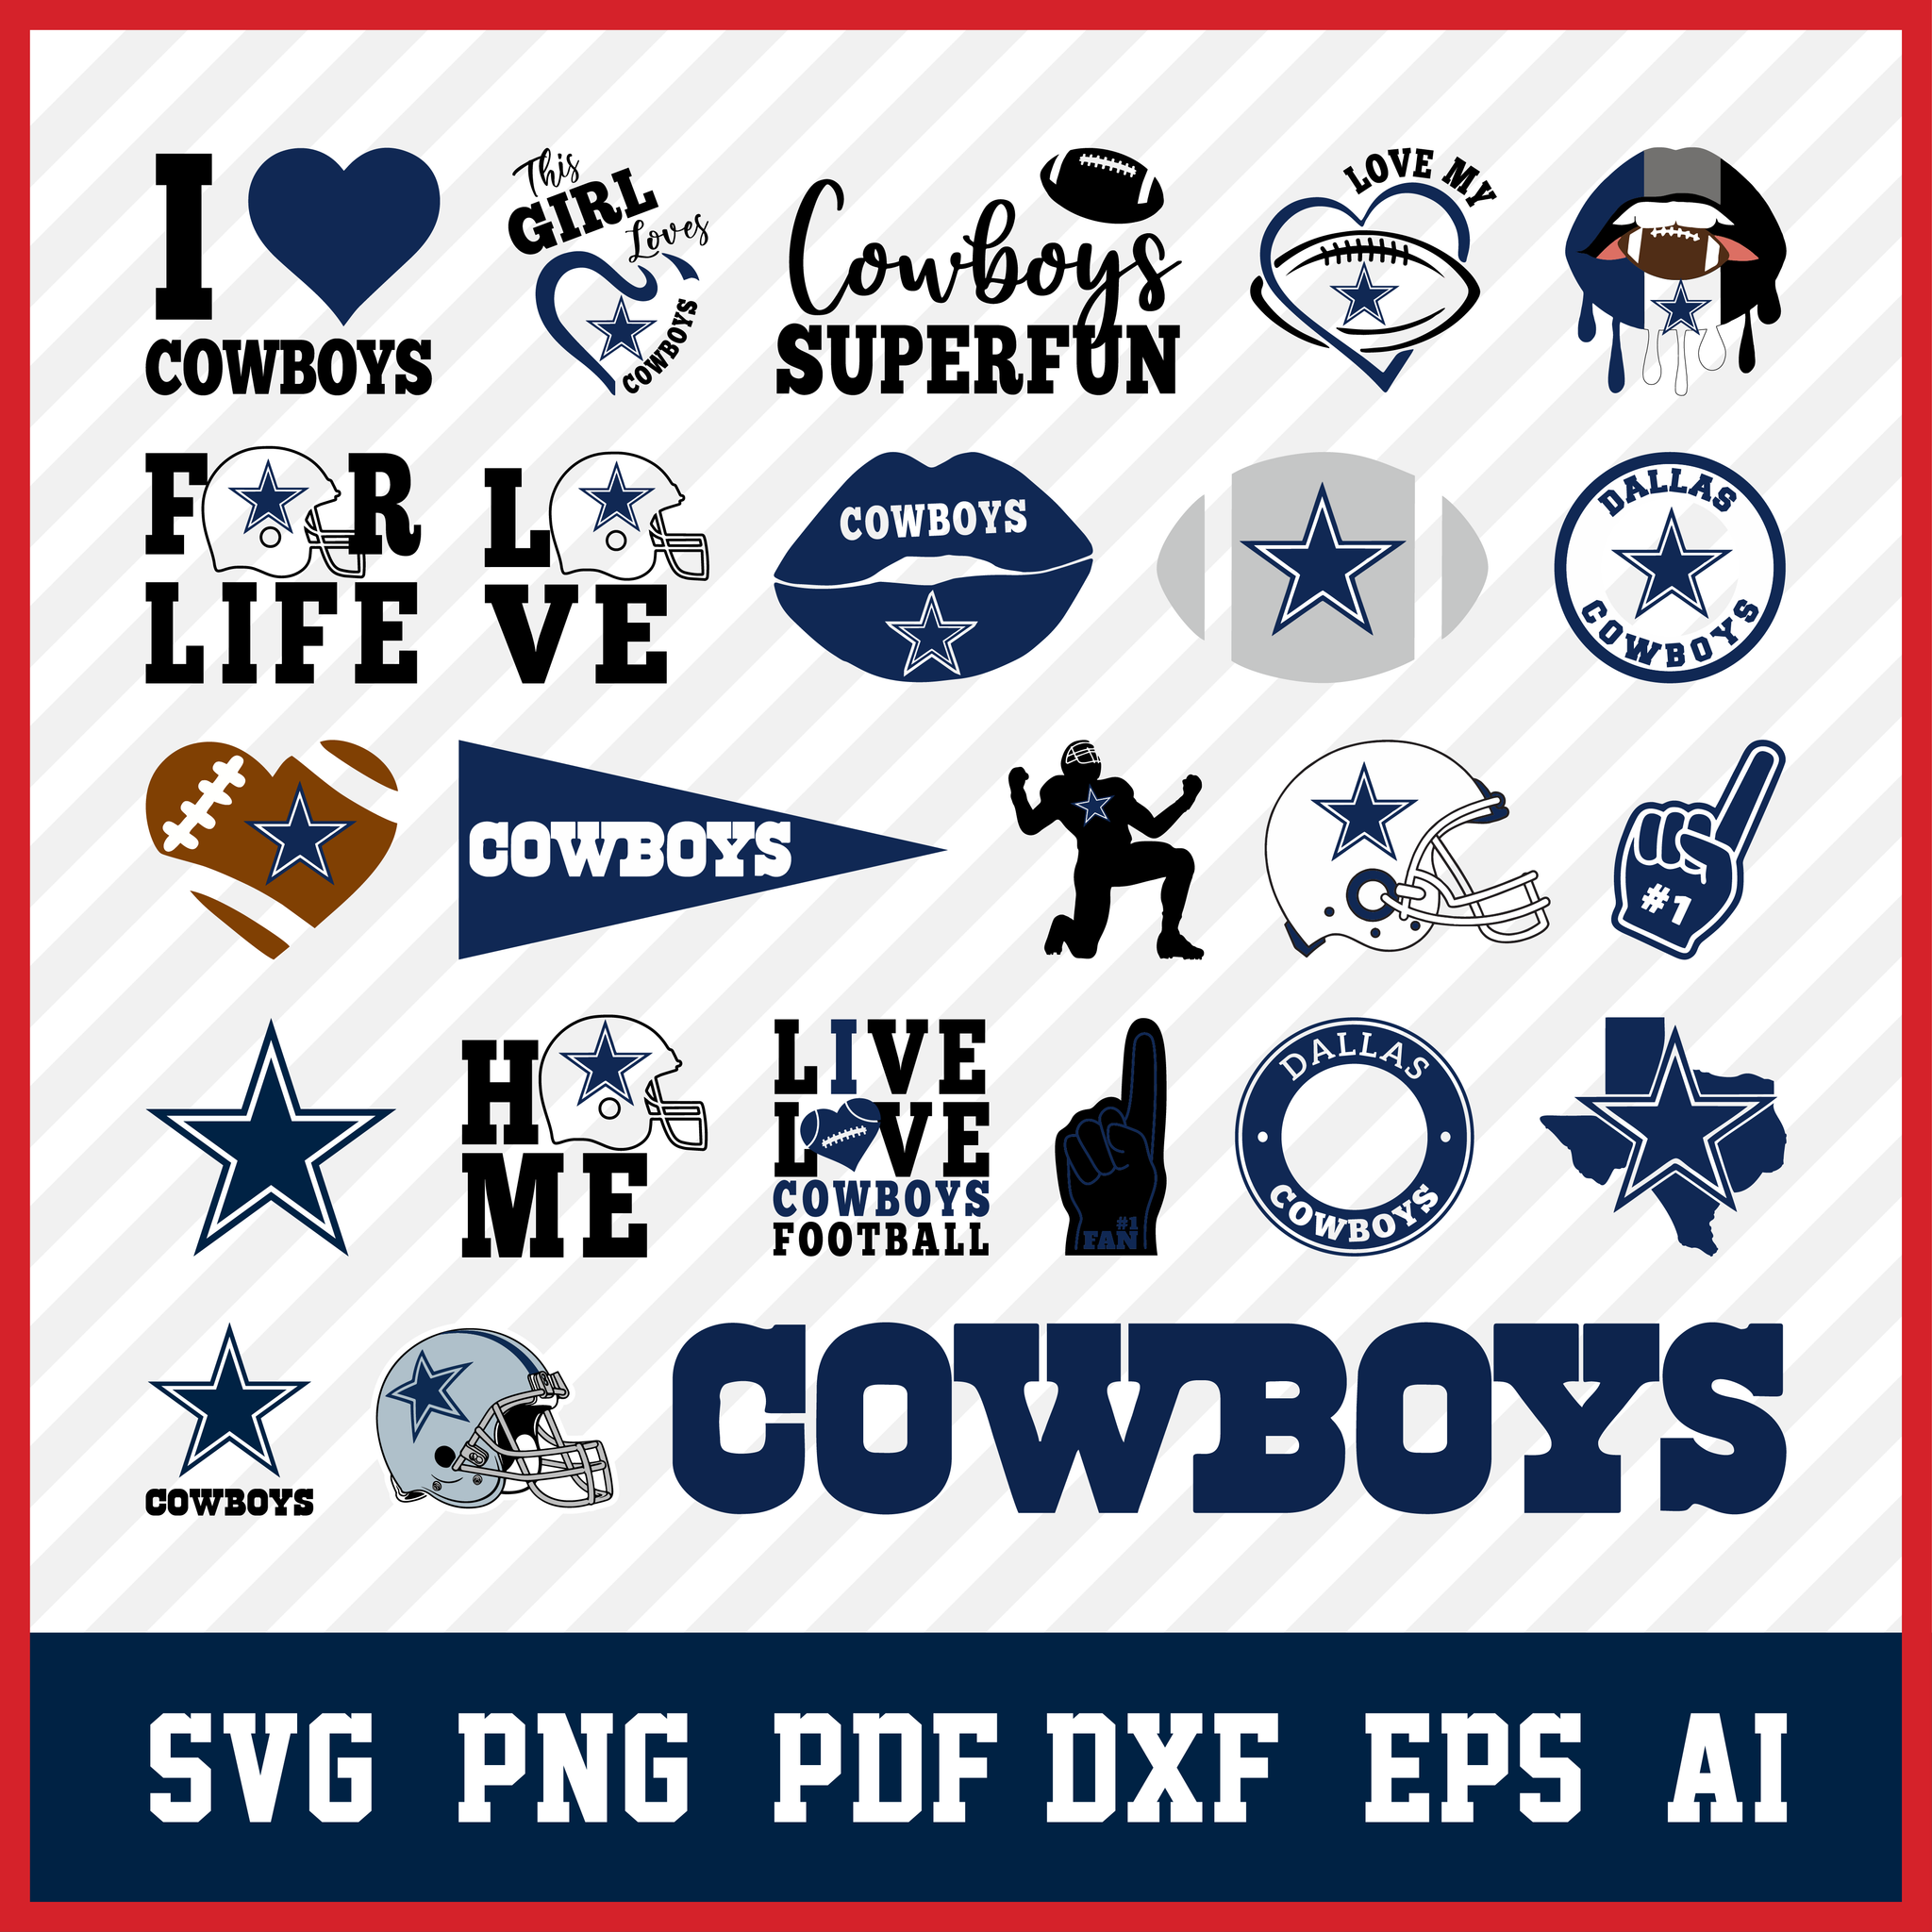 Dallas Cowboys Svg Bundle, Cowboys Svg, Dallas Cowboys Logo, Dallas Clipart, Football SVG bundle, Svg File for cricut, NFL Svg  • INSTANT Digital DOWNLOAD includes: 1 Zip and the following file formats: SVG, DXF, PNG, EPS, PDF  • Artwork files are perfect for printing, resizing, coloring and modifying with the appropriate software.  • These digital clip art files are perfect for any projects such as: Scrap booking, paper goods, DIY invitations & announcements, clothing and accessories, party favors, cupcake